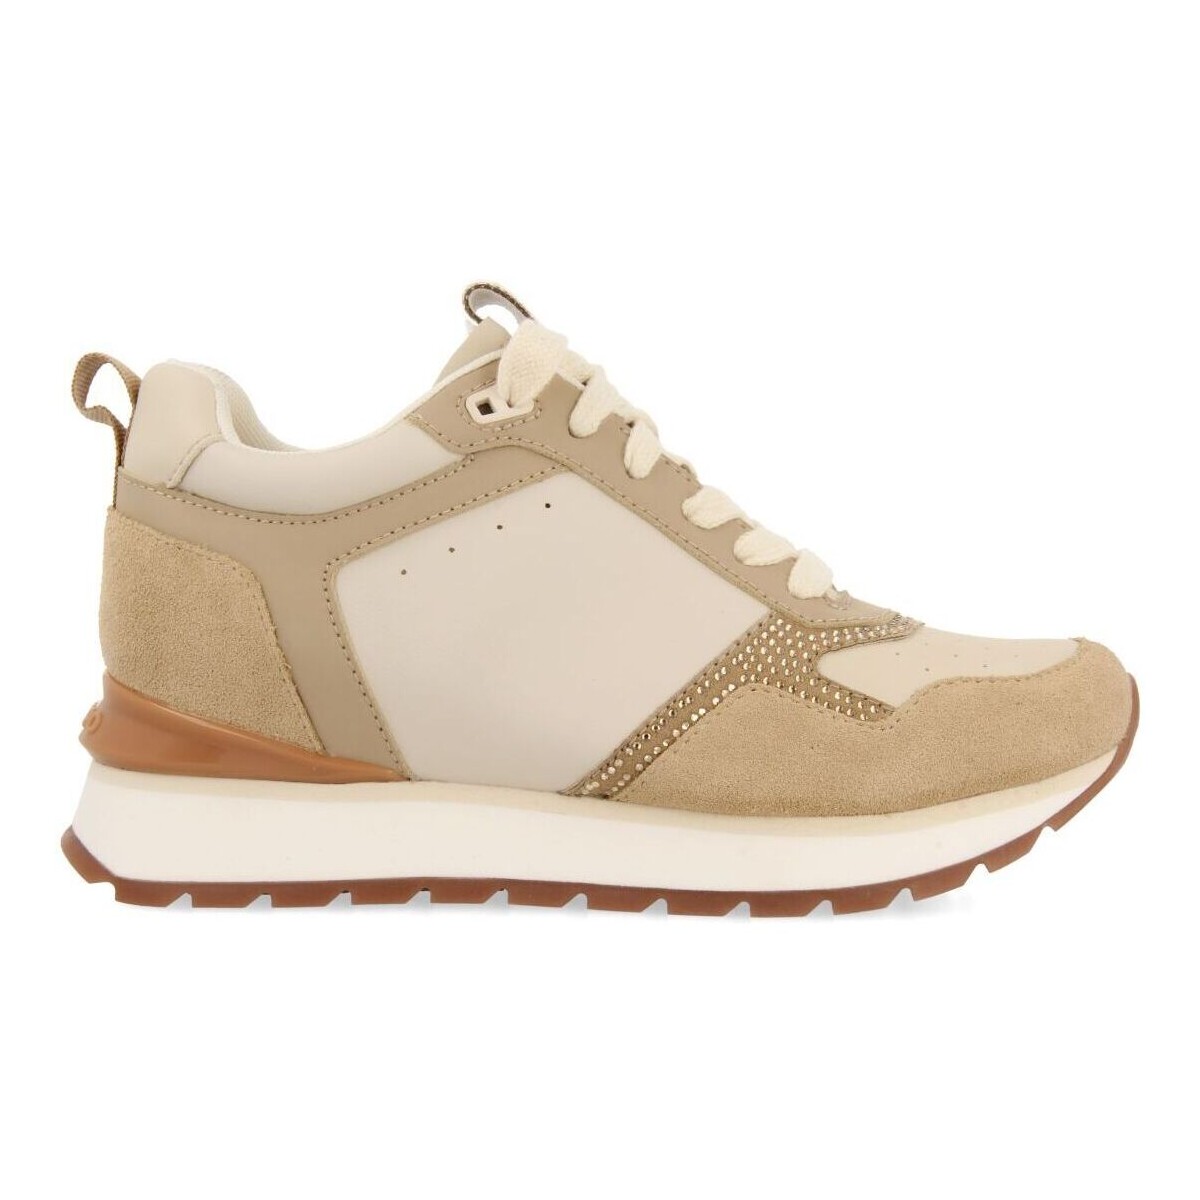 Schoenen Dames Sneakers Gioseppo F Other